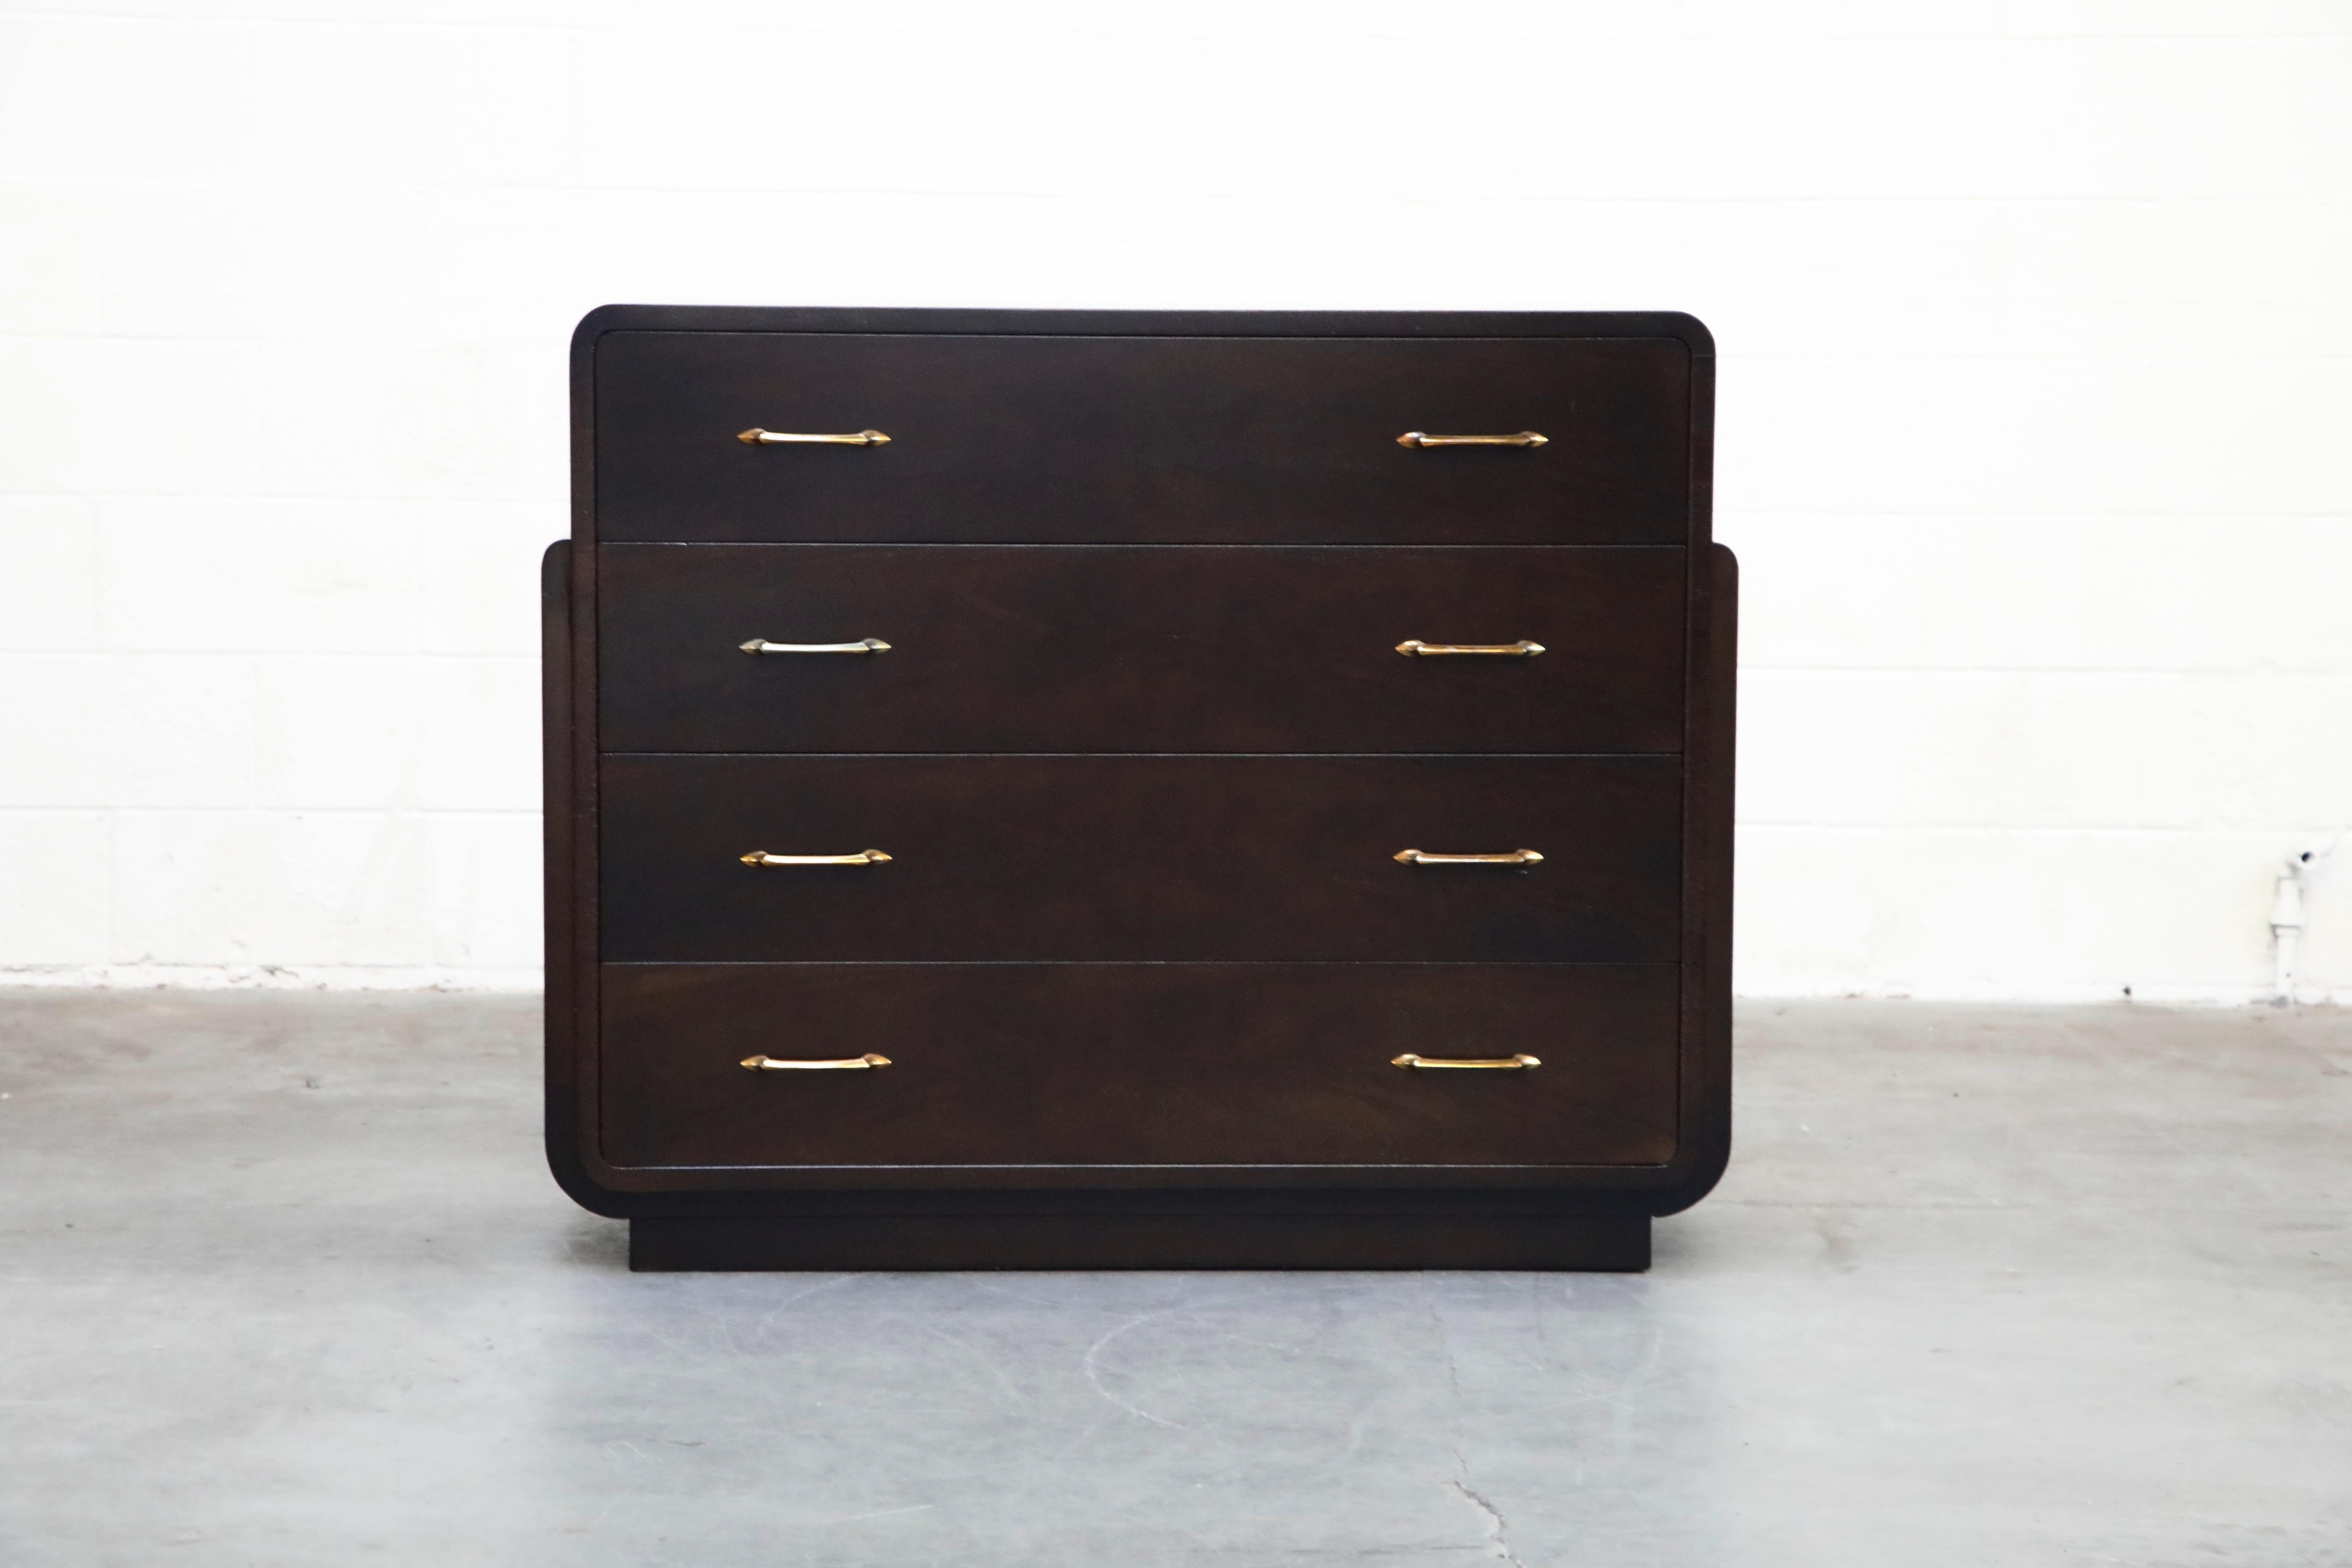 This fully-restored streamline Moderne Widdicomb dresser is attributed to Donald Deskey and signed with Widdicomb labels. This four drawer cabinet is most notable for its distinctive streamline Moderne / Art Deco styling and stylized brass drawer